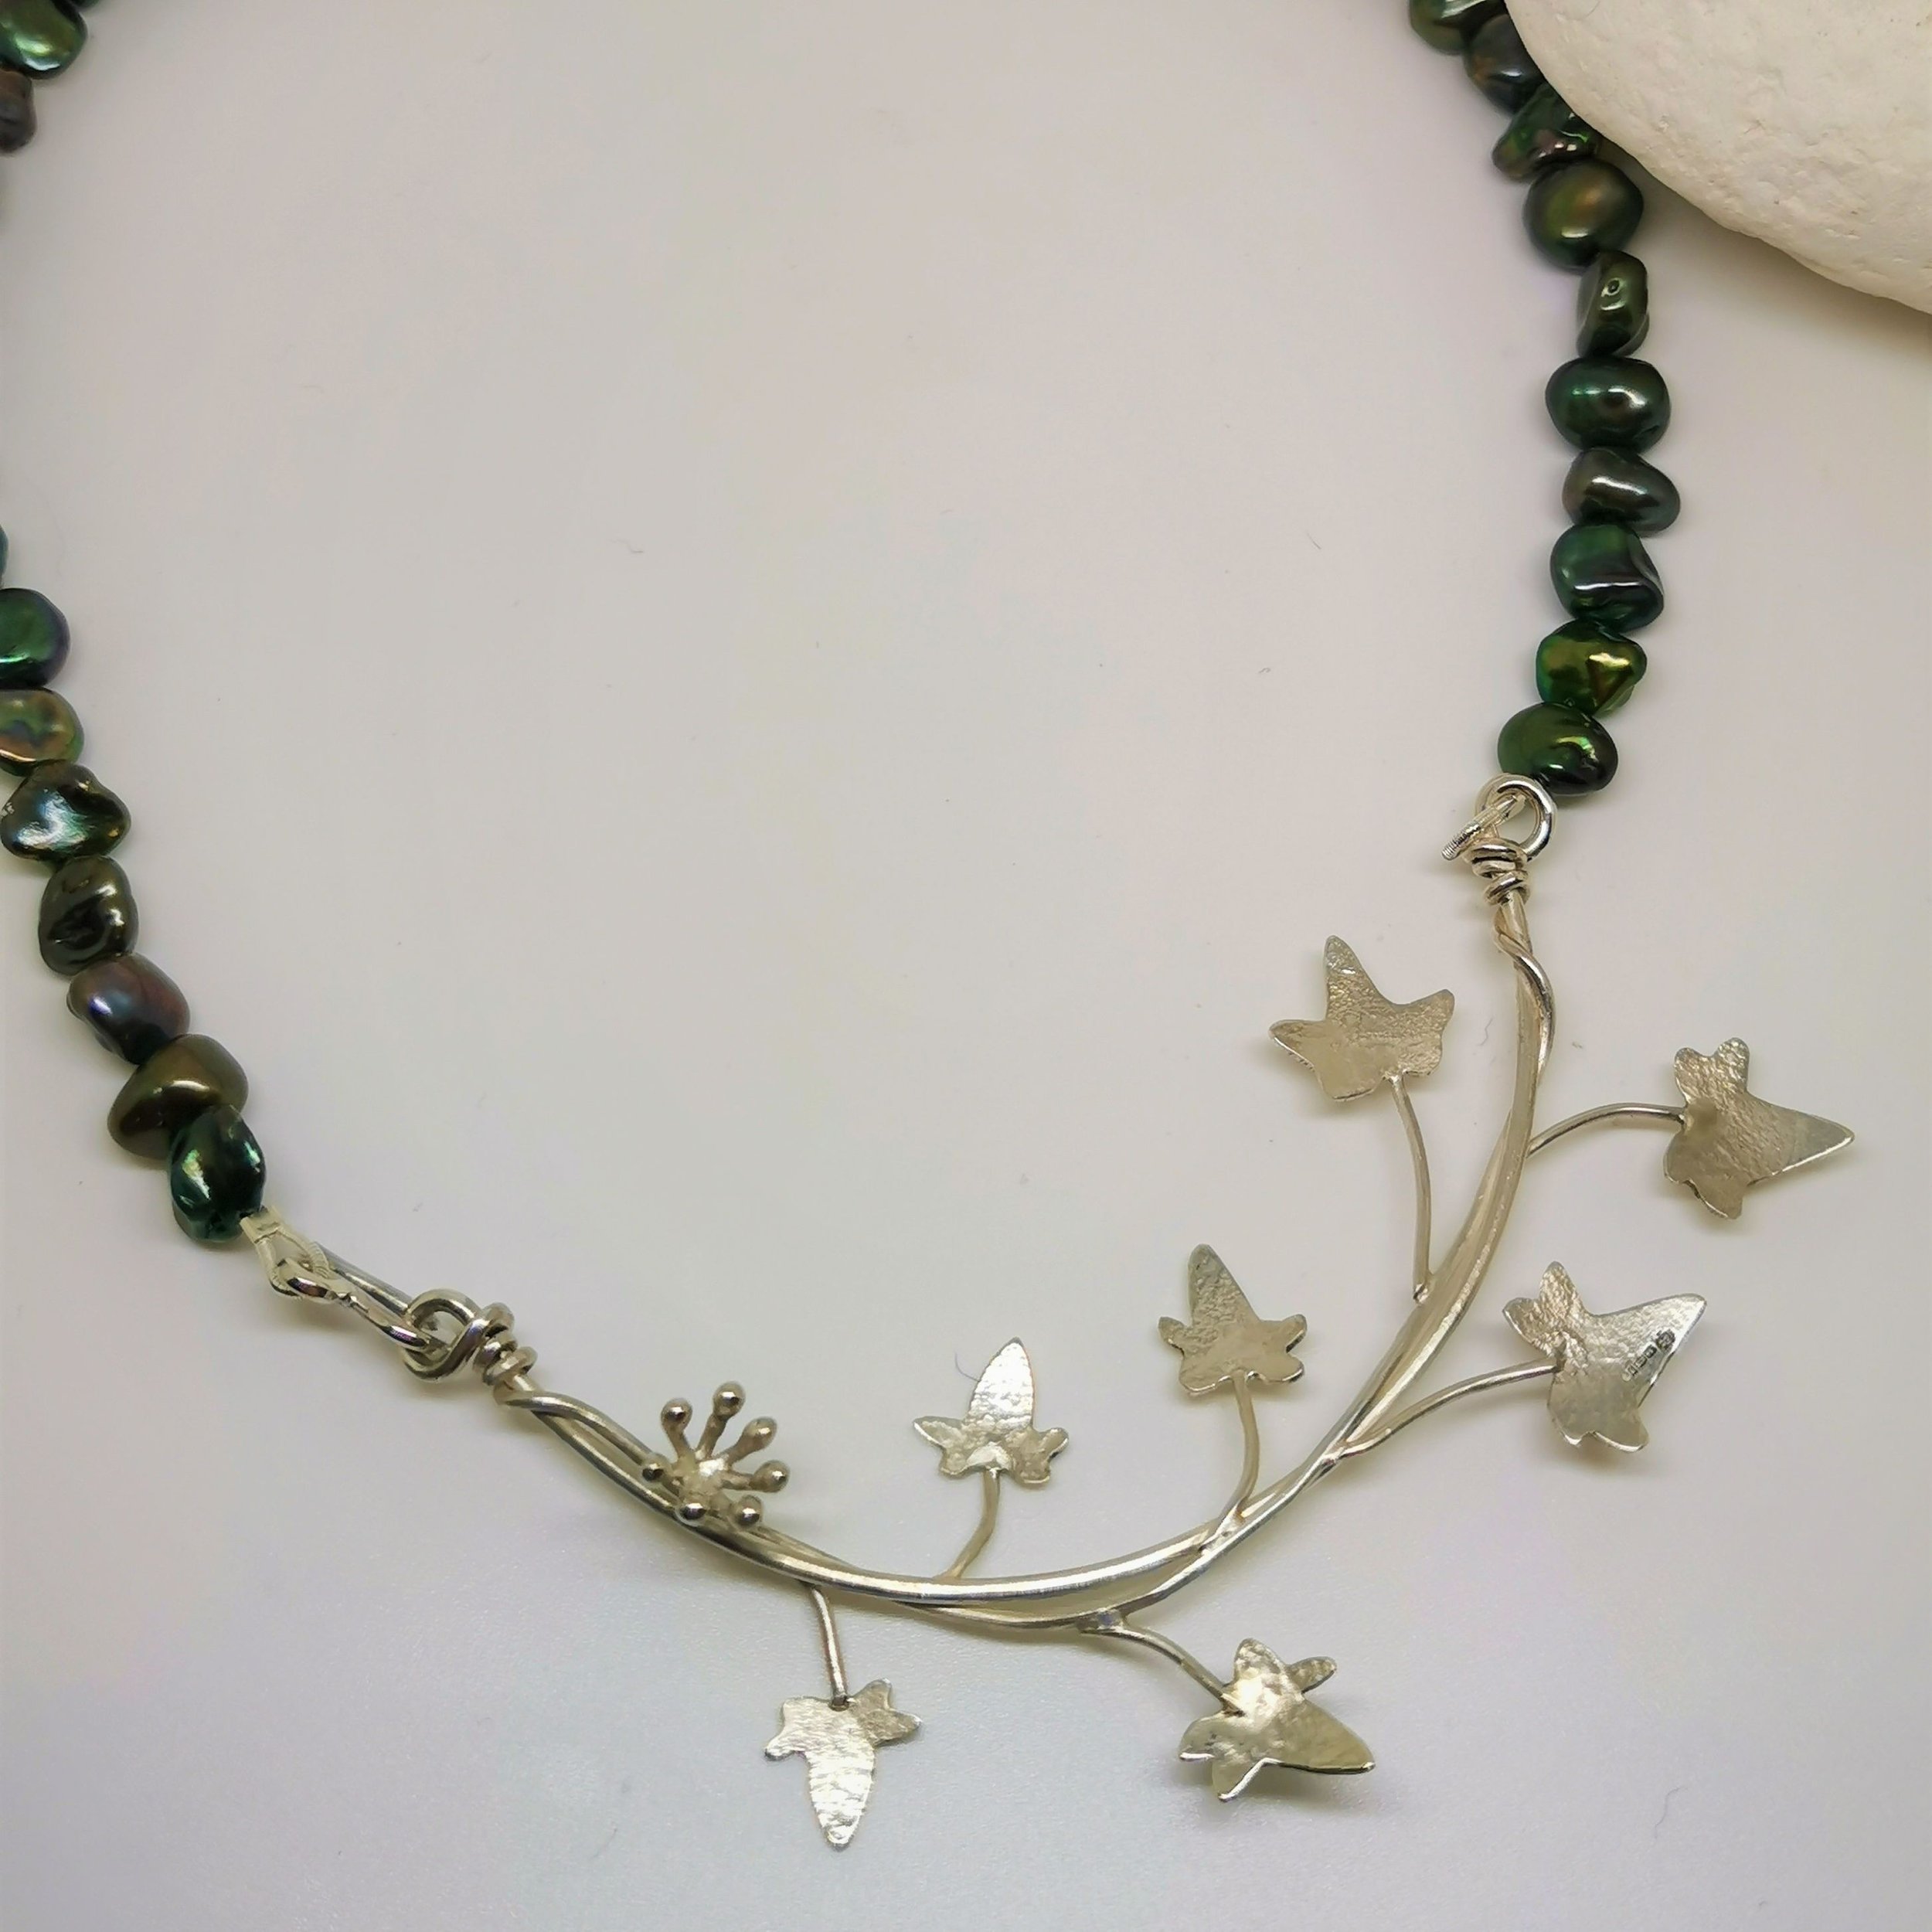 Ivy necklace